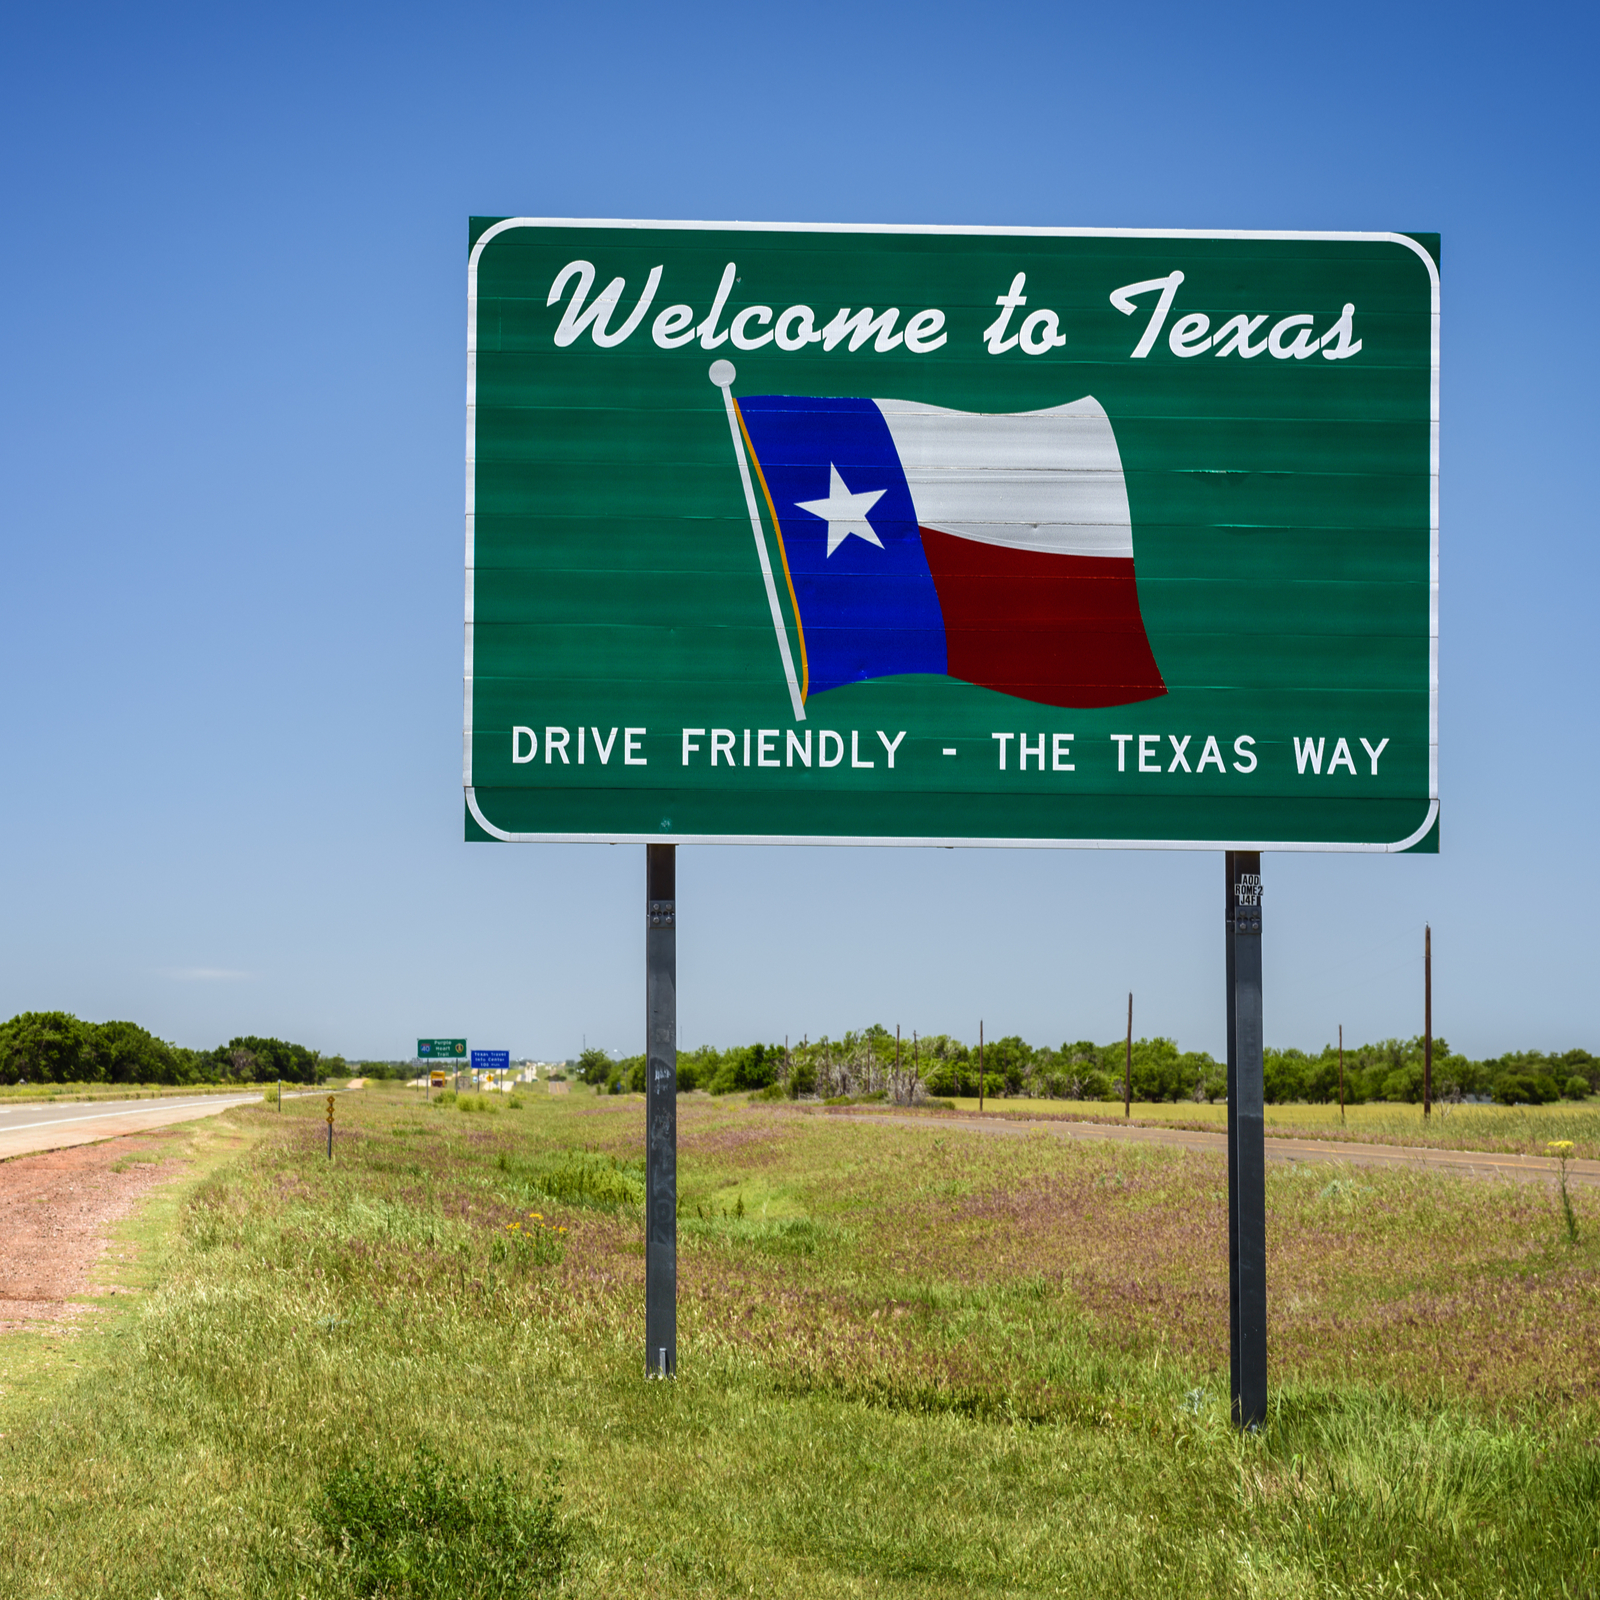 Mining Round-Up: Sky Mining CEO Flees With $35 Million, Texas Attracts Miners